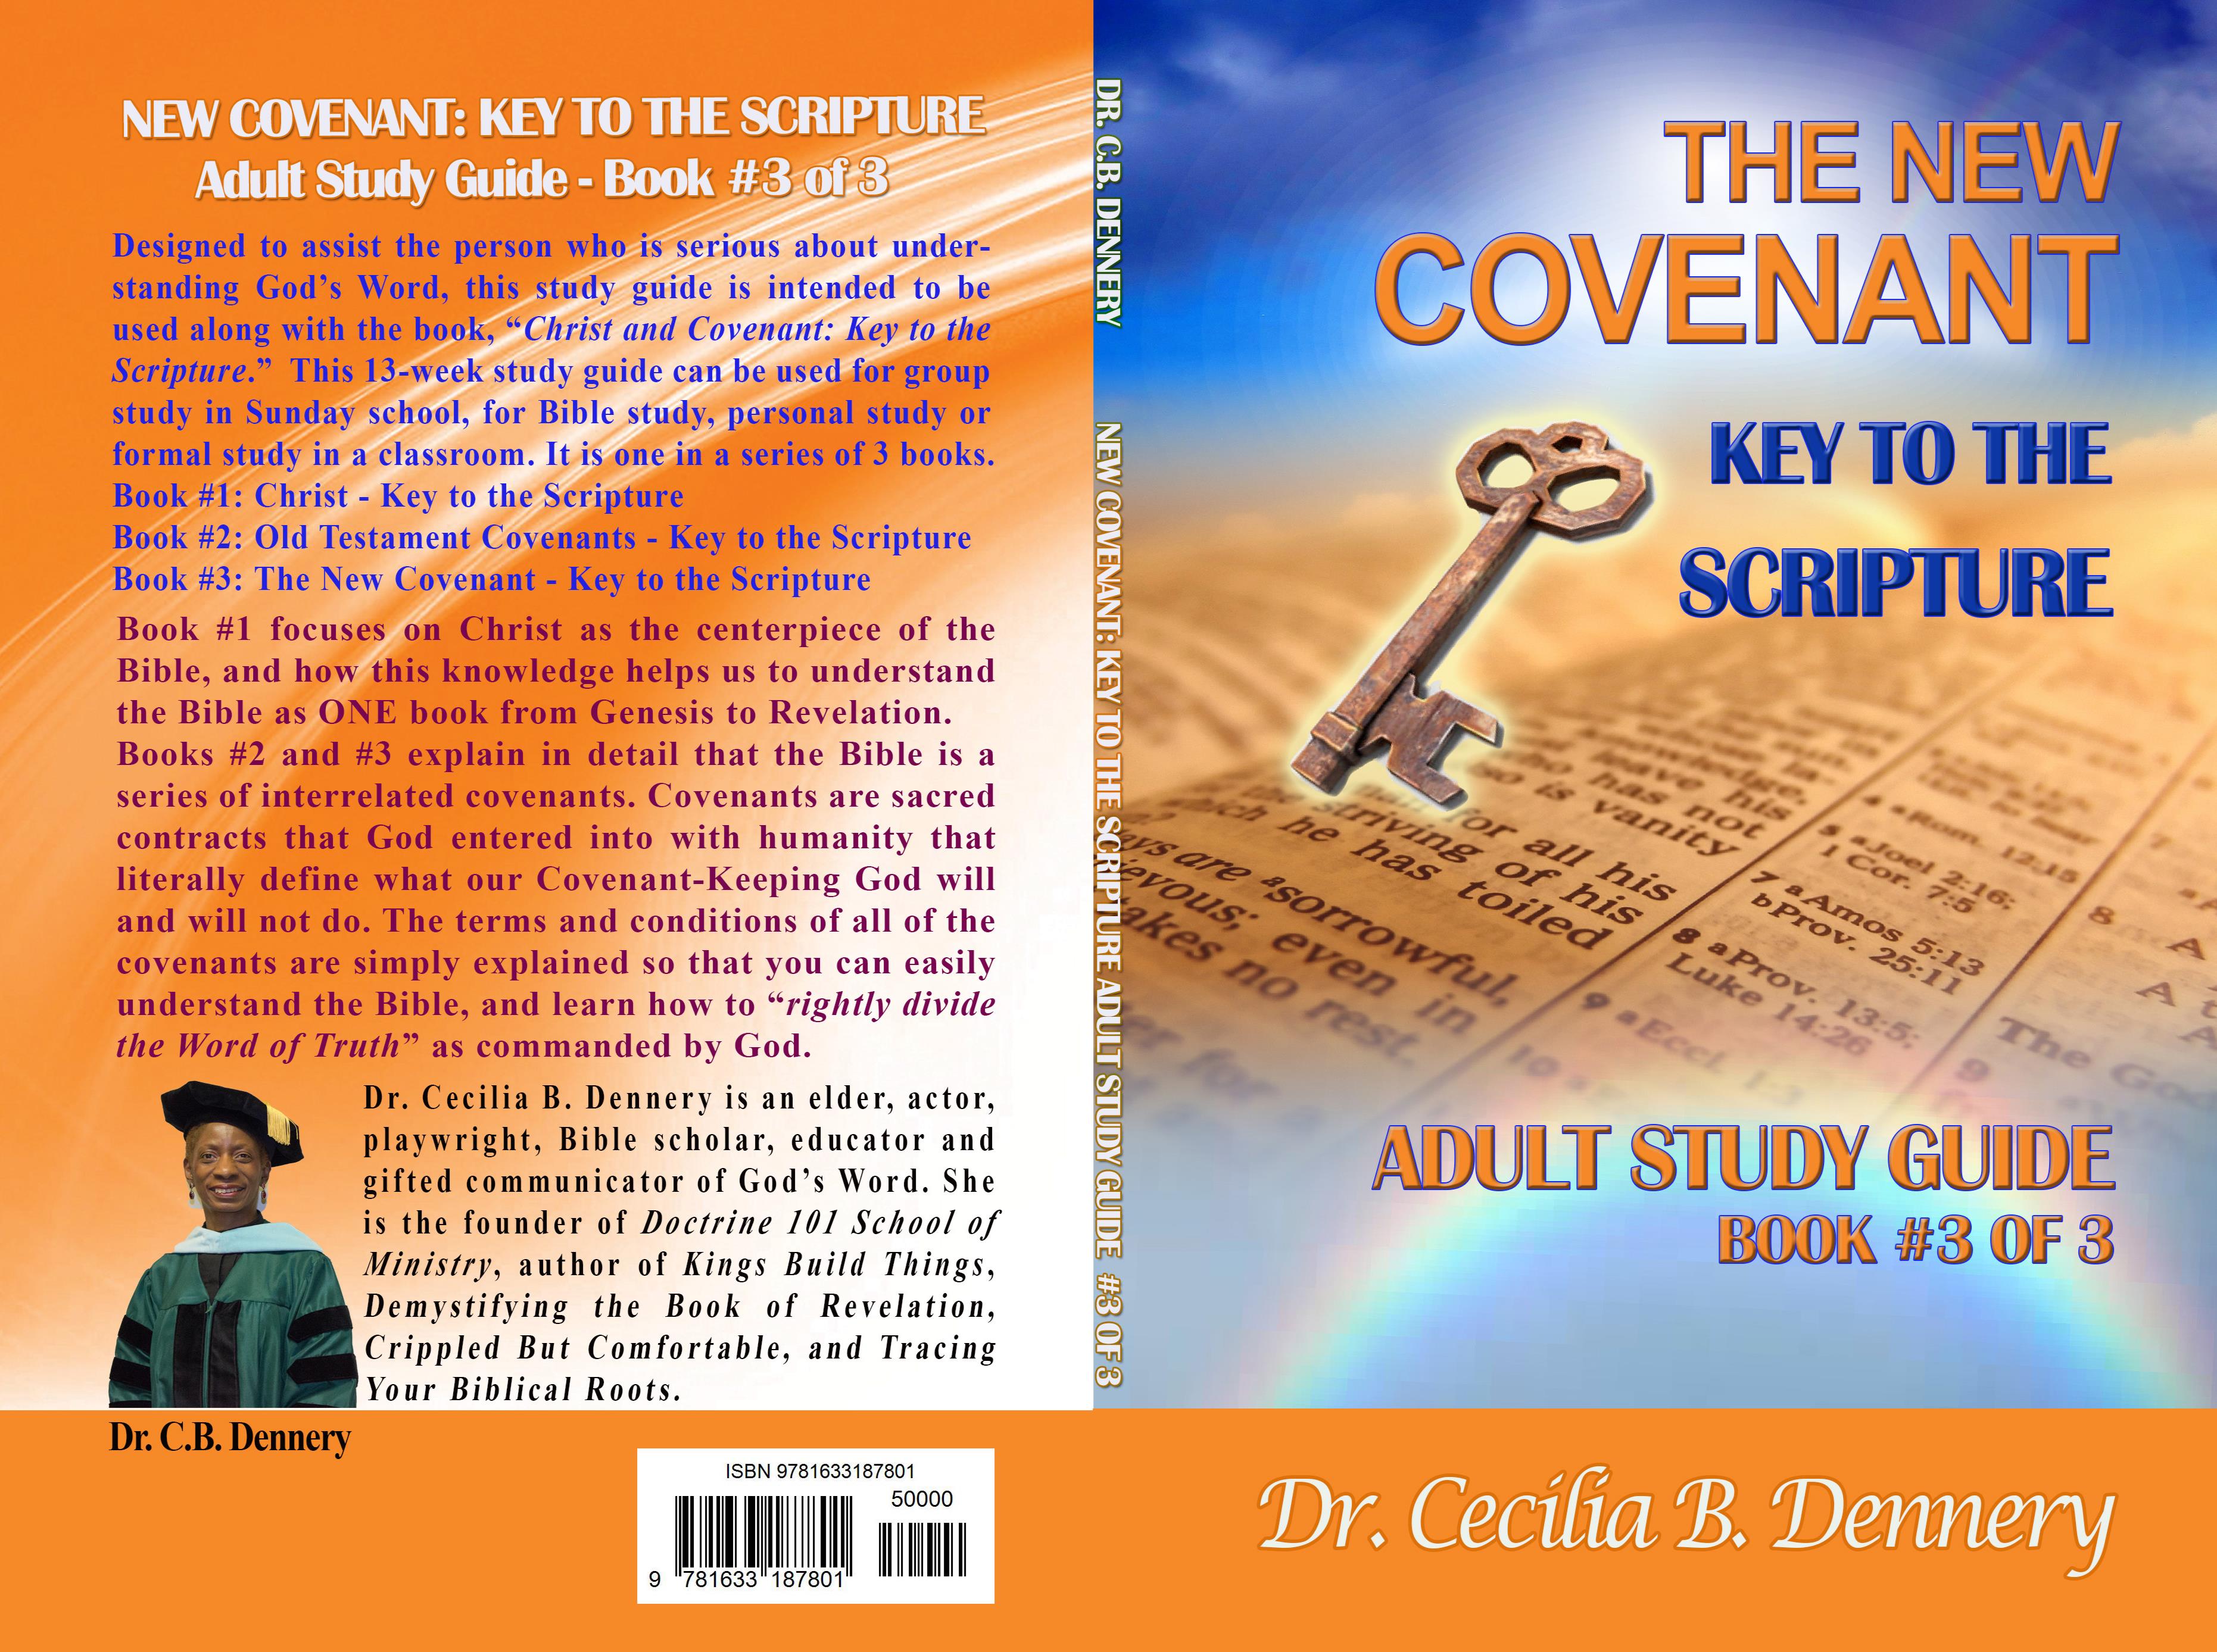 New Covenant: Key to the Scripture - Adult Study Guide Book #3 of 3 cover image